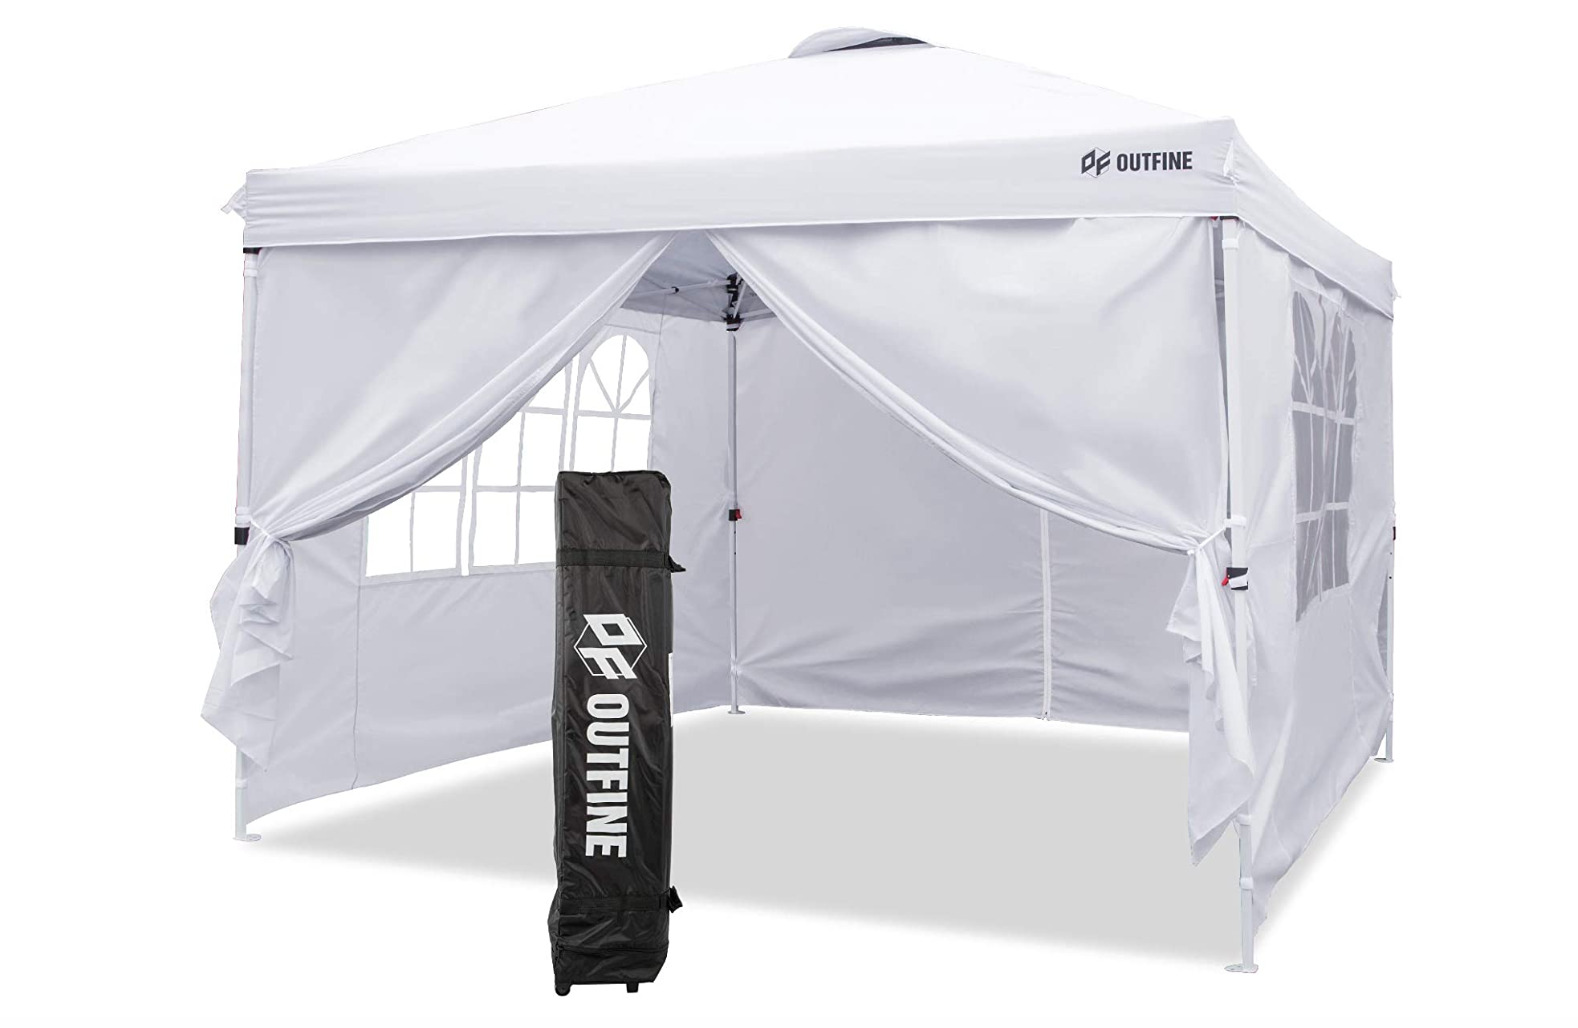 OUTFINE Canopy 10'x10' Pop Up Commercial Instant Gazebo Tent white color